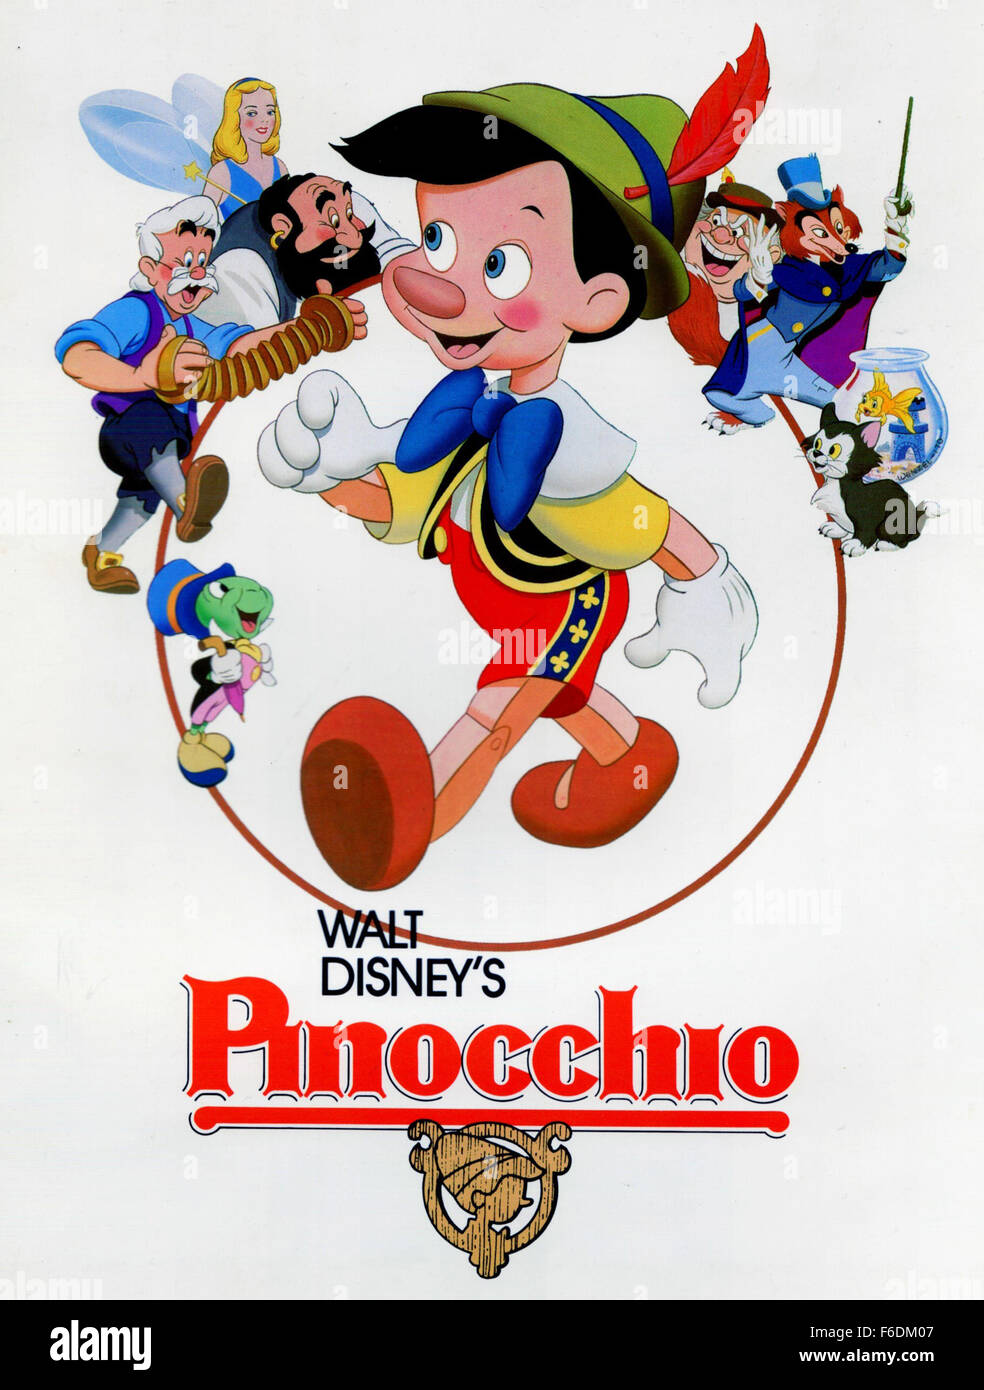 RELEASE DATE: February 9, 1940. MOVIE TITLE: Pinocchio. STUDIO: Walt Disney Productions. PLOT: Inventor Gepetto creates a wooden marionette called Pinocchio. His wish that Pinocchio be a real boy is unexpectedly granted by a fairy. The fairy assigns Jiminy Cricket to act as Pinocchio'sconscience and keep him out of trouble. Jiminy is not too successful in this endeavor and most of the film is spent with Pinocchio deep in trouble. PICTURED: . Stock Photo